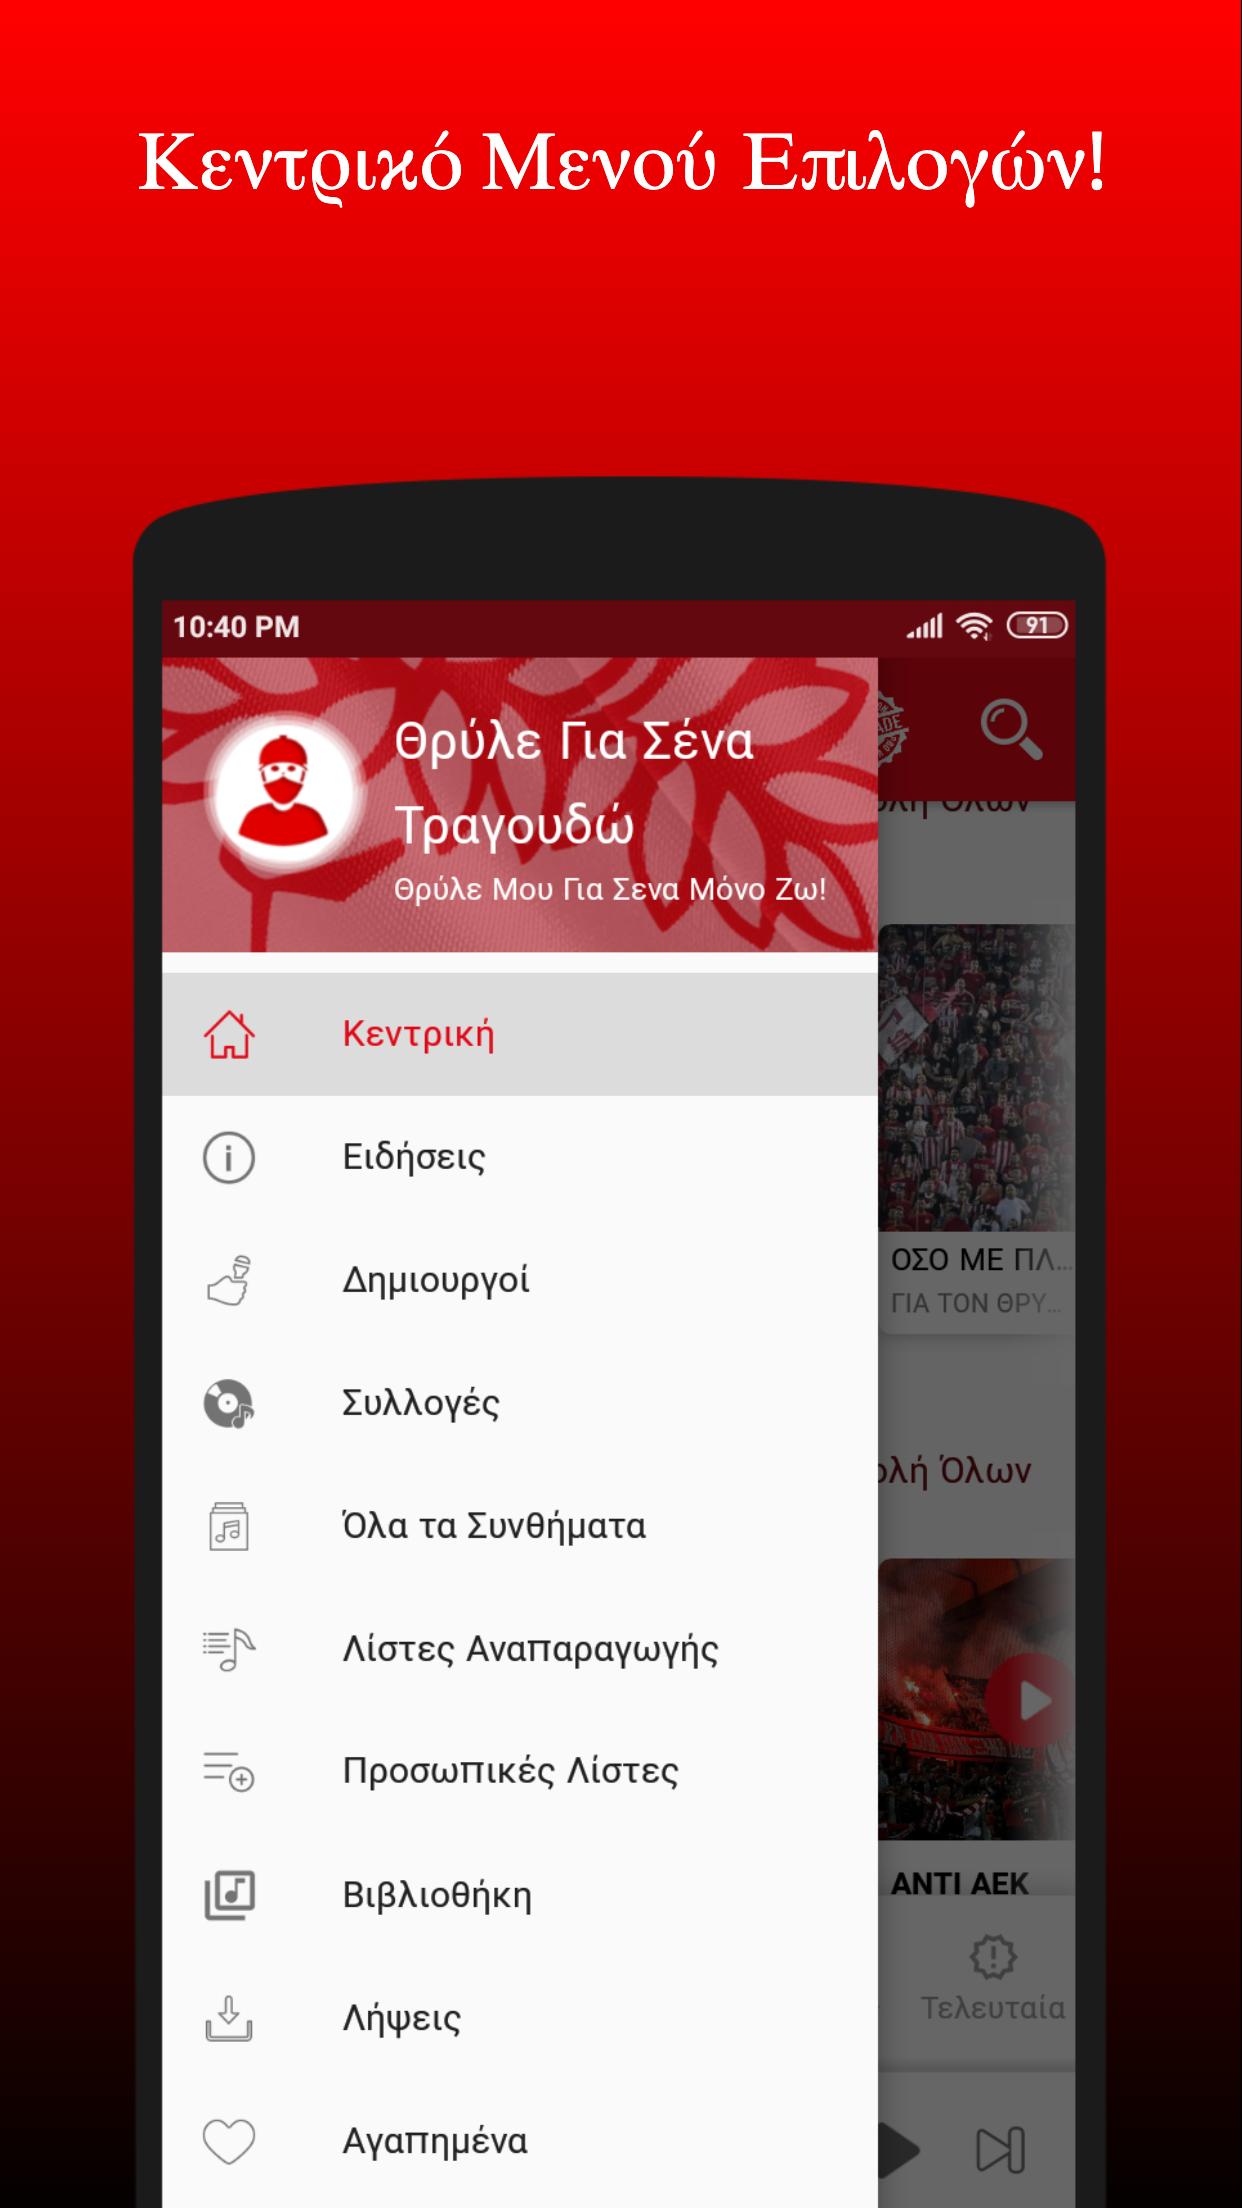 Olympiakos Synthimata Fans Chants for Android - APK Download